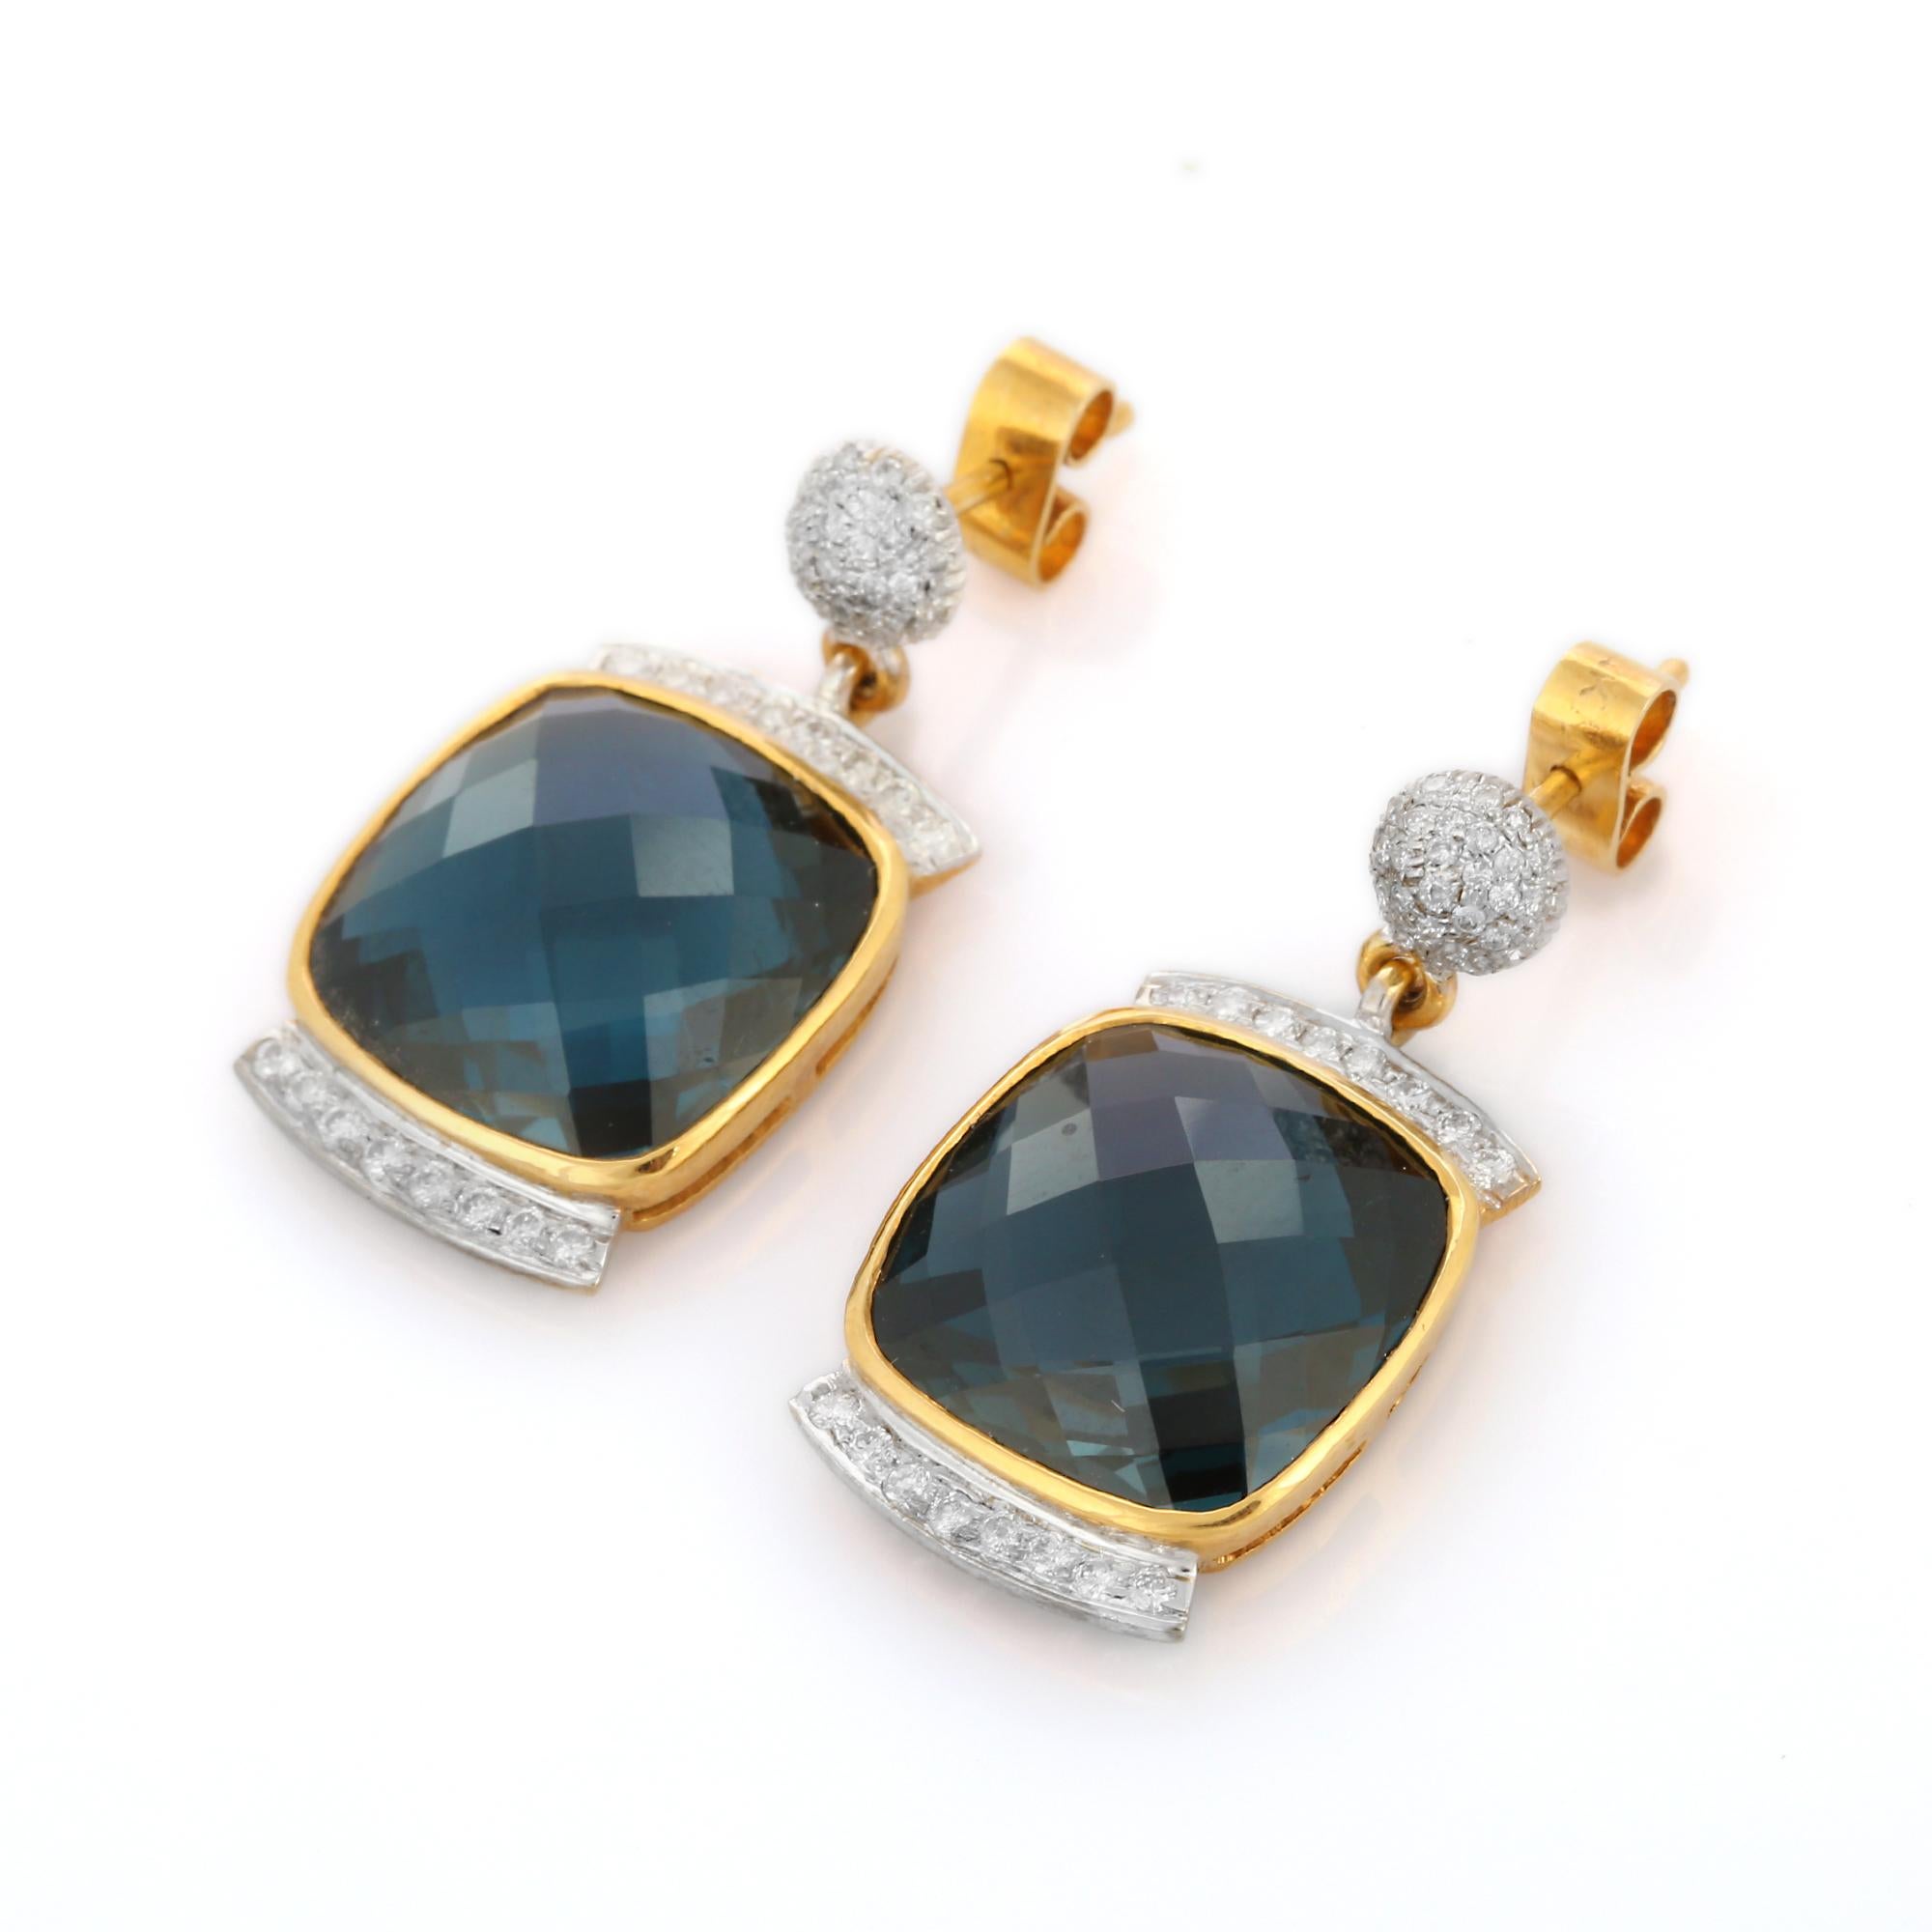 Blue Topaz and Diamond Dangle earrings to make a statement with your look. These earrings create a sparkling, luxurious look featuring cushion cut gemstone.
If you love to gravitate towards unique styles, this piece of jewelry is perfect for